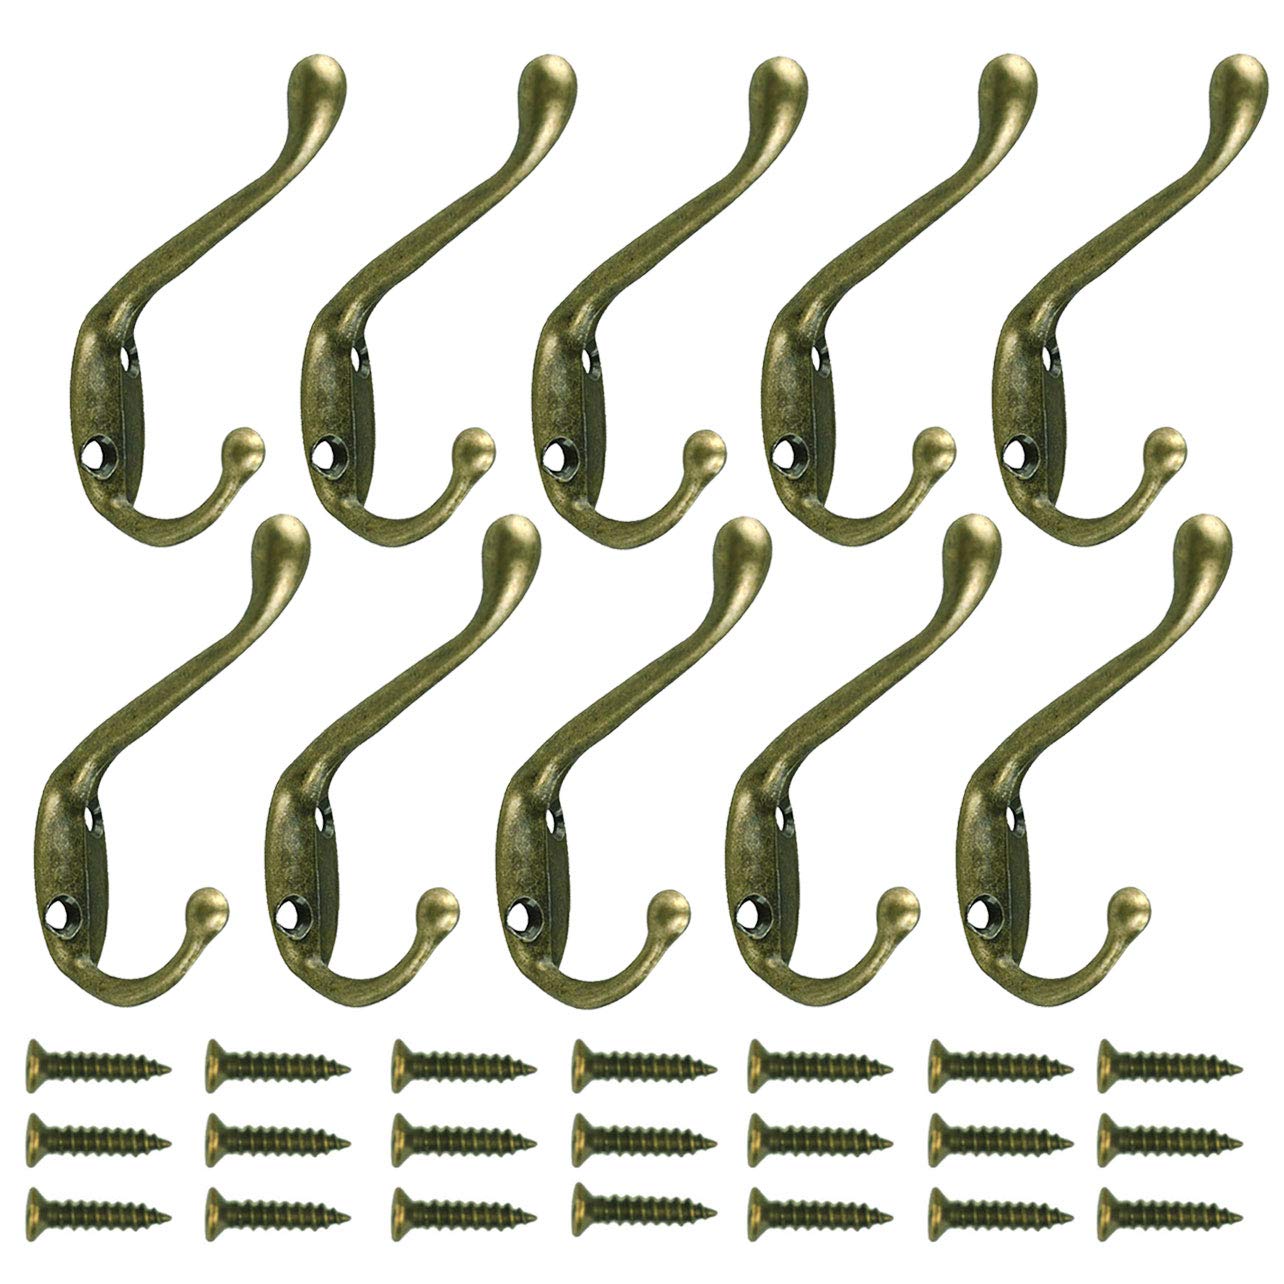 10 Pack Heavy Duty Wall Mounted Coat Hooks Hanger Holder Bronze for Wall Vintage Decorative Double Robe Hooks with 22 Pieces Screws (Bronze)